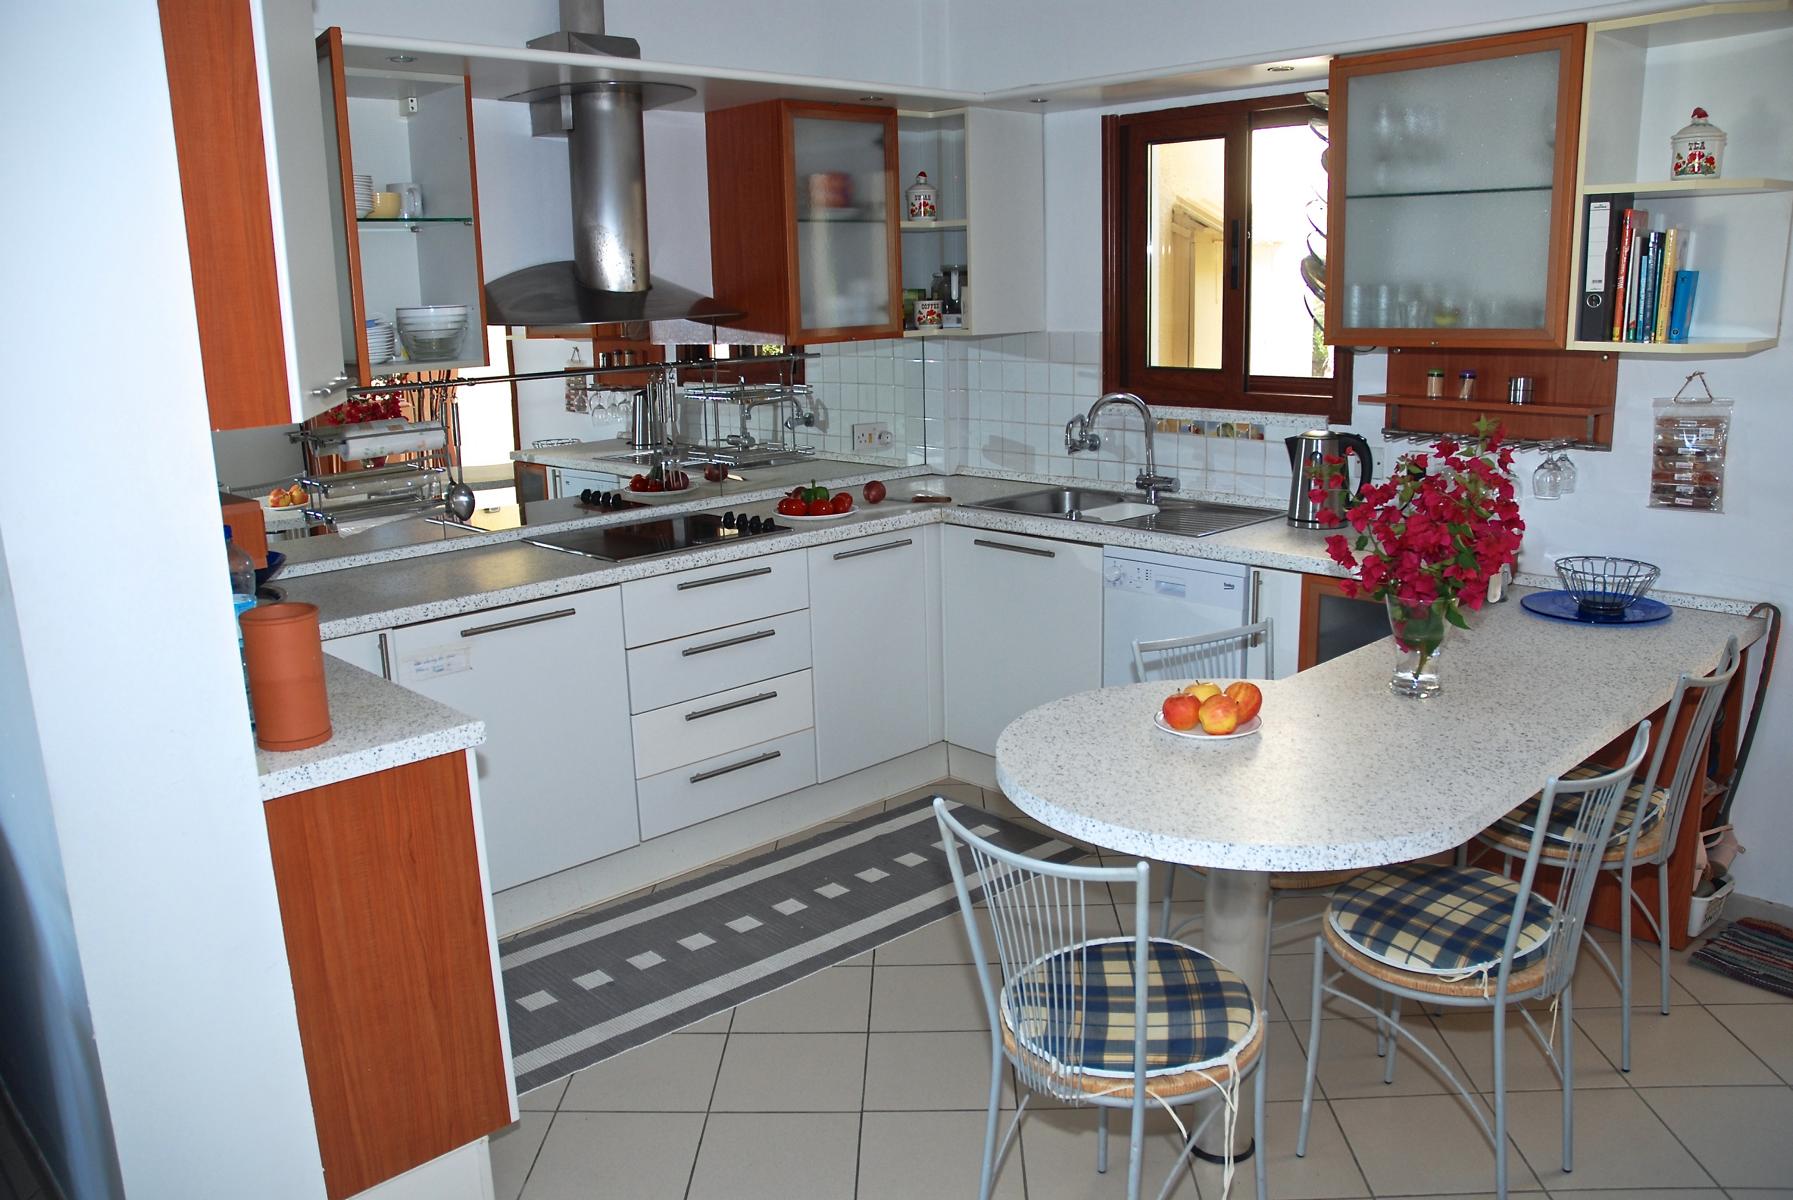 Kitchen with dining table